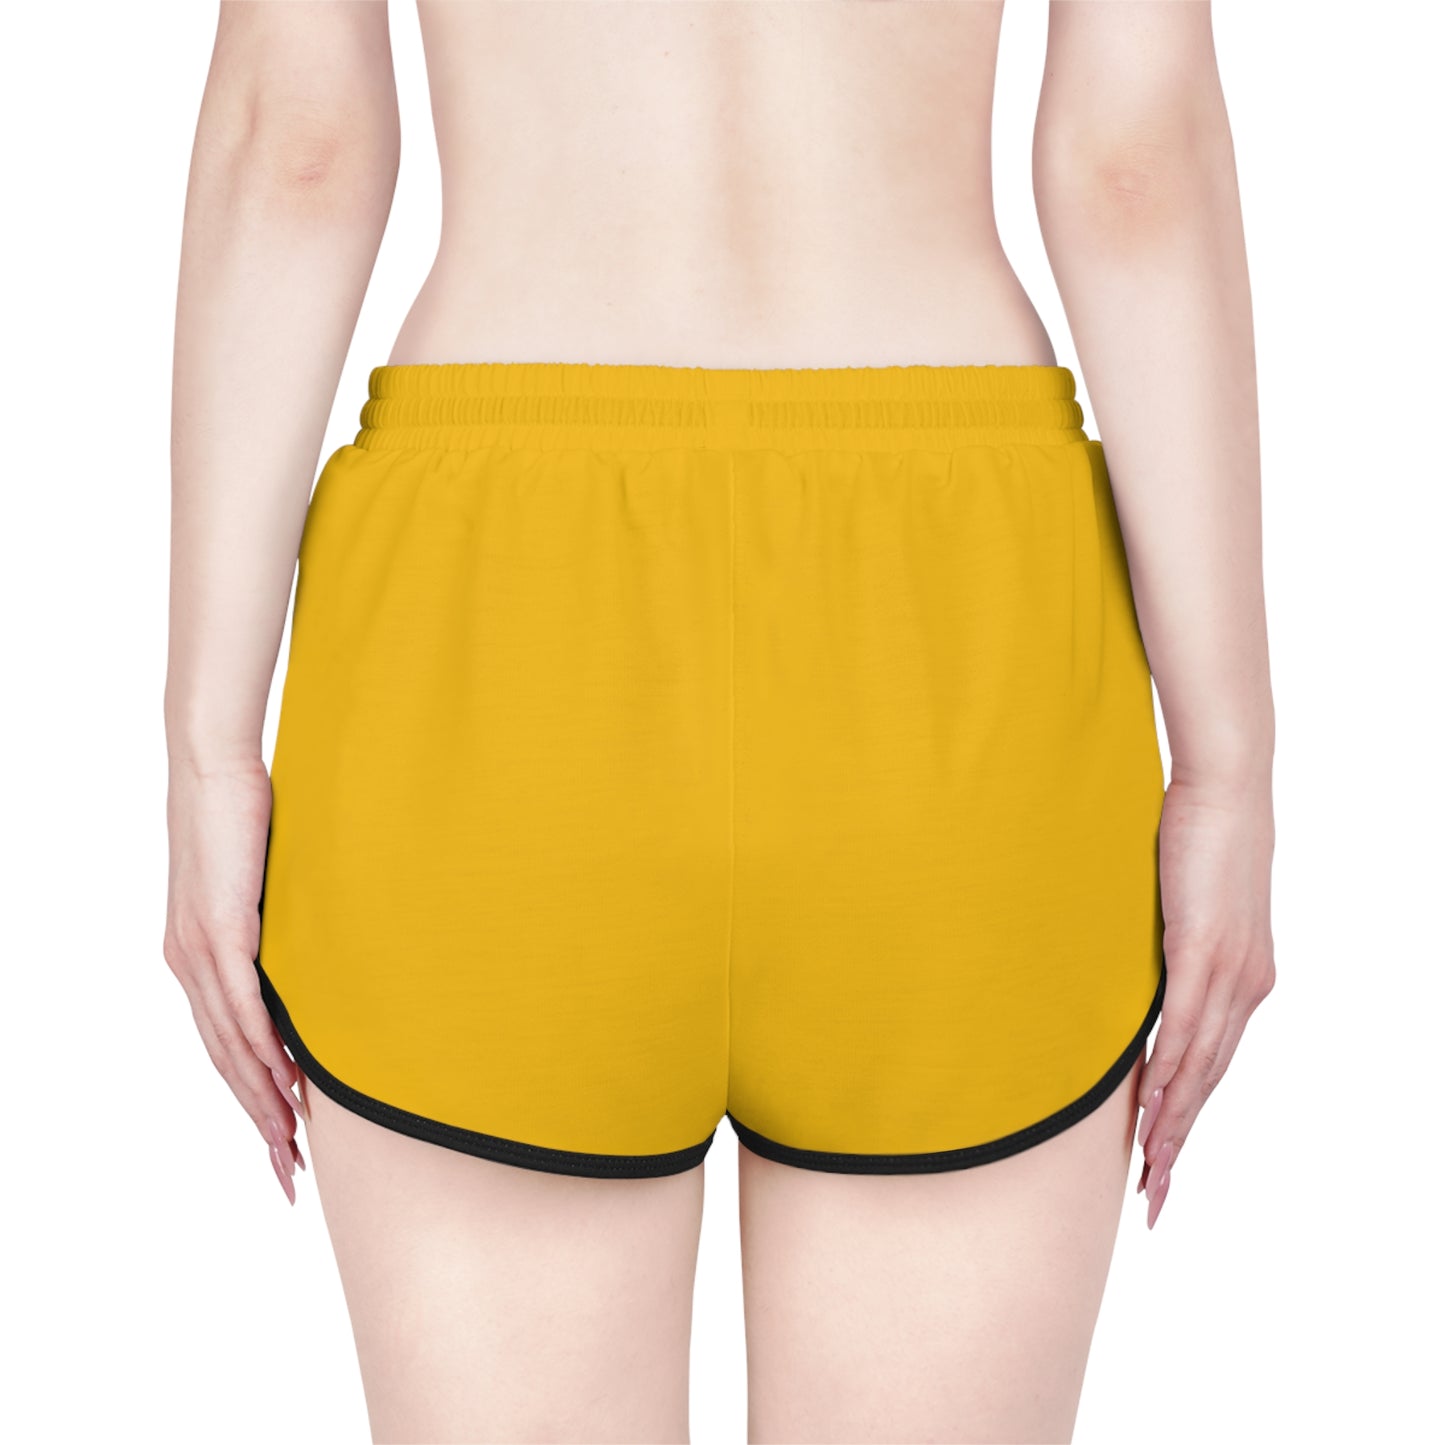 LOVE Women's Relaxed Shorts